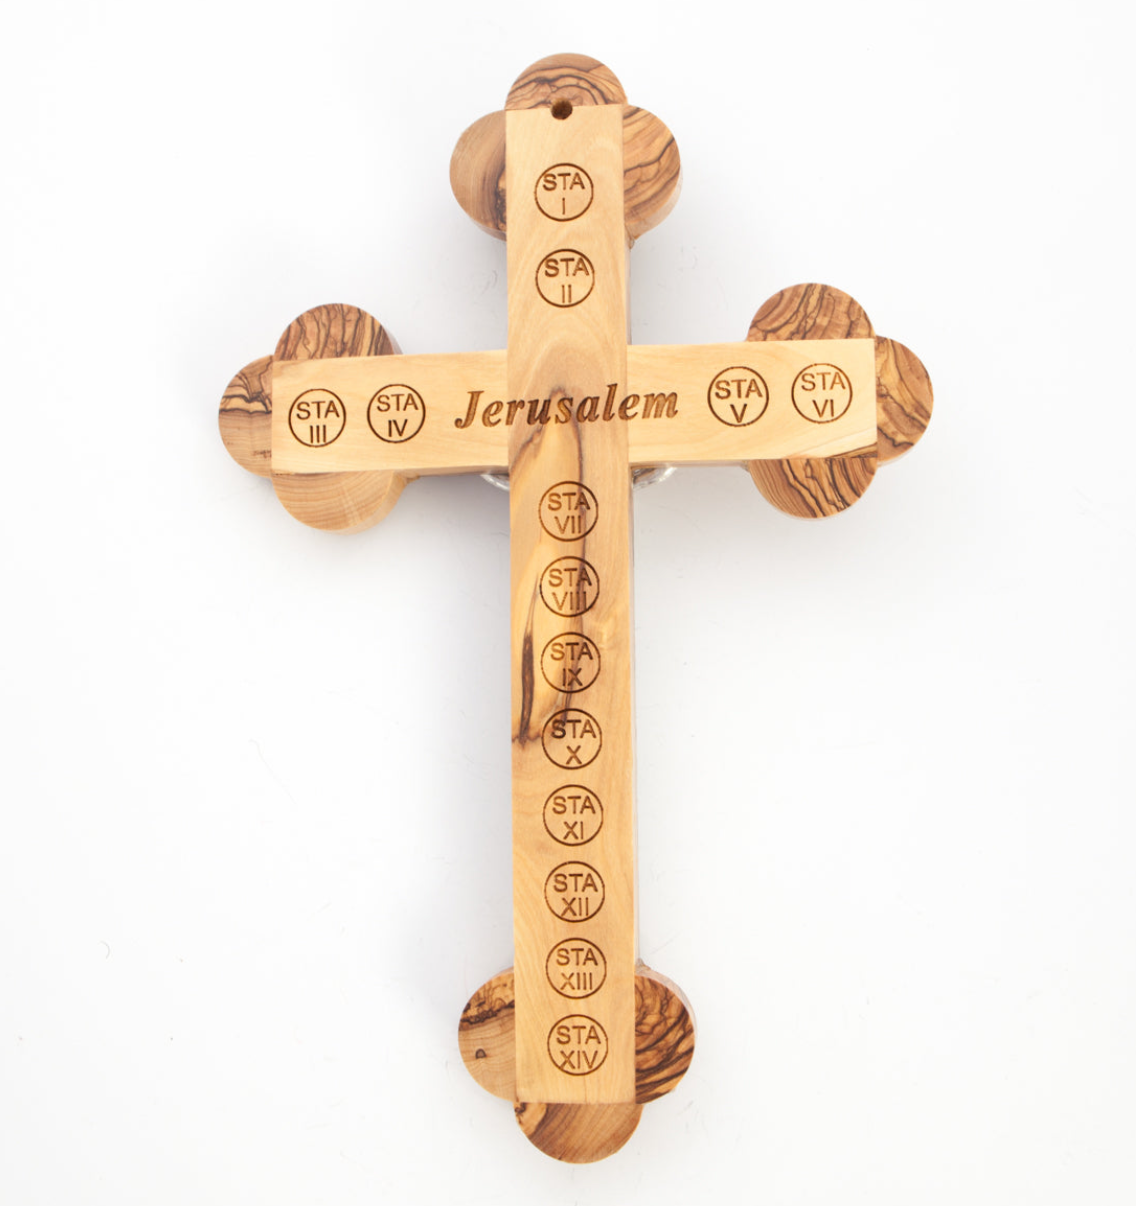 14 Fourteen Stations of the Cross Engaged on Back Mother of Pearl Crucifix for Wall with Silver Jesus Corpus, Olive Wood Handmade with souvenirs from the Holy Land